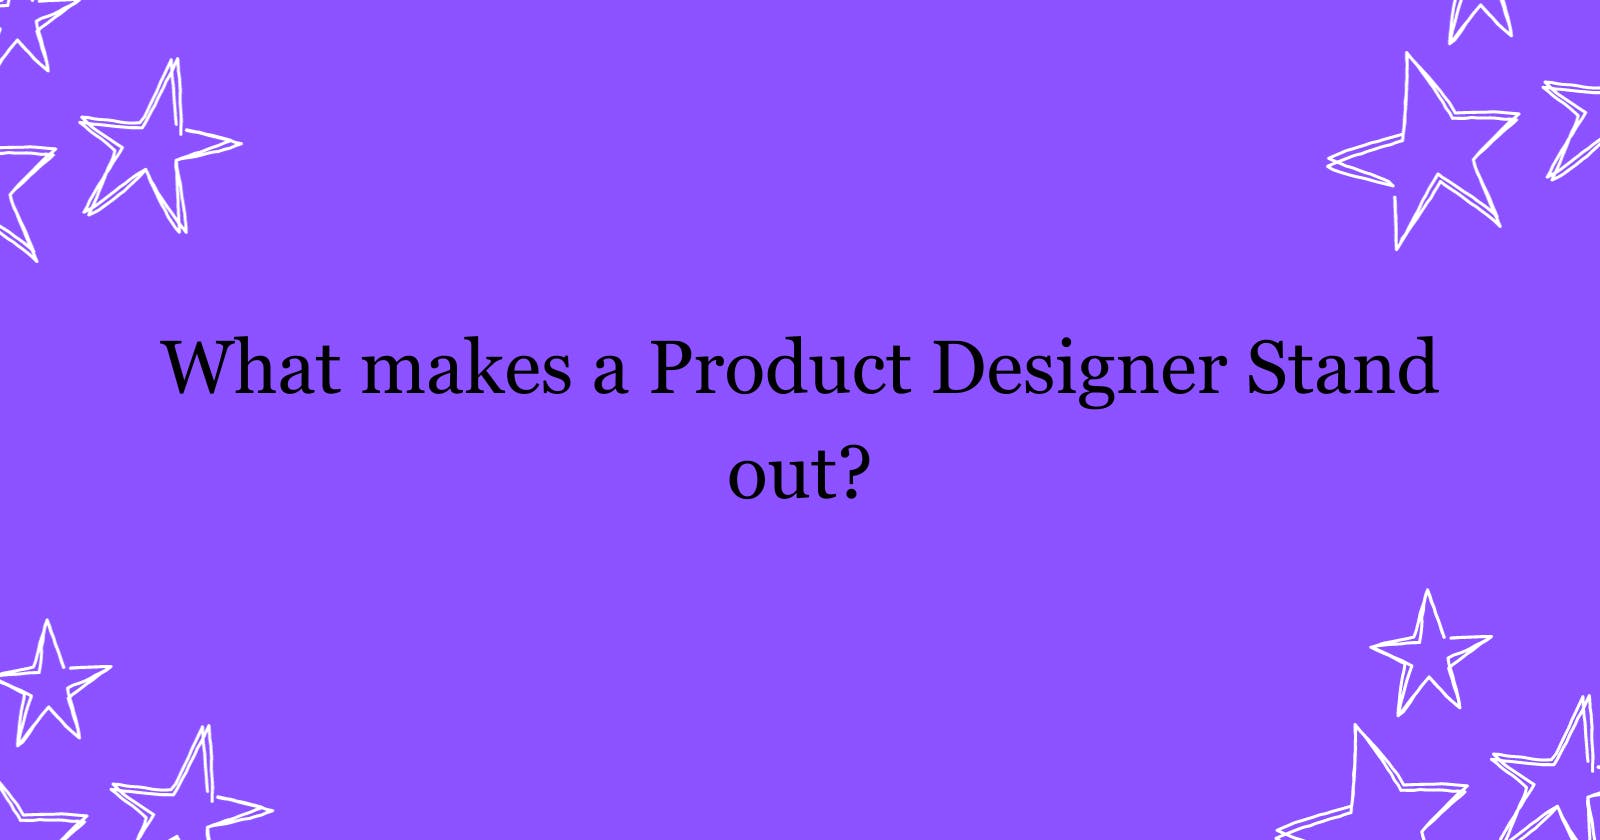 What makes a Product designer stand out?